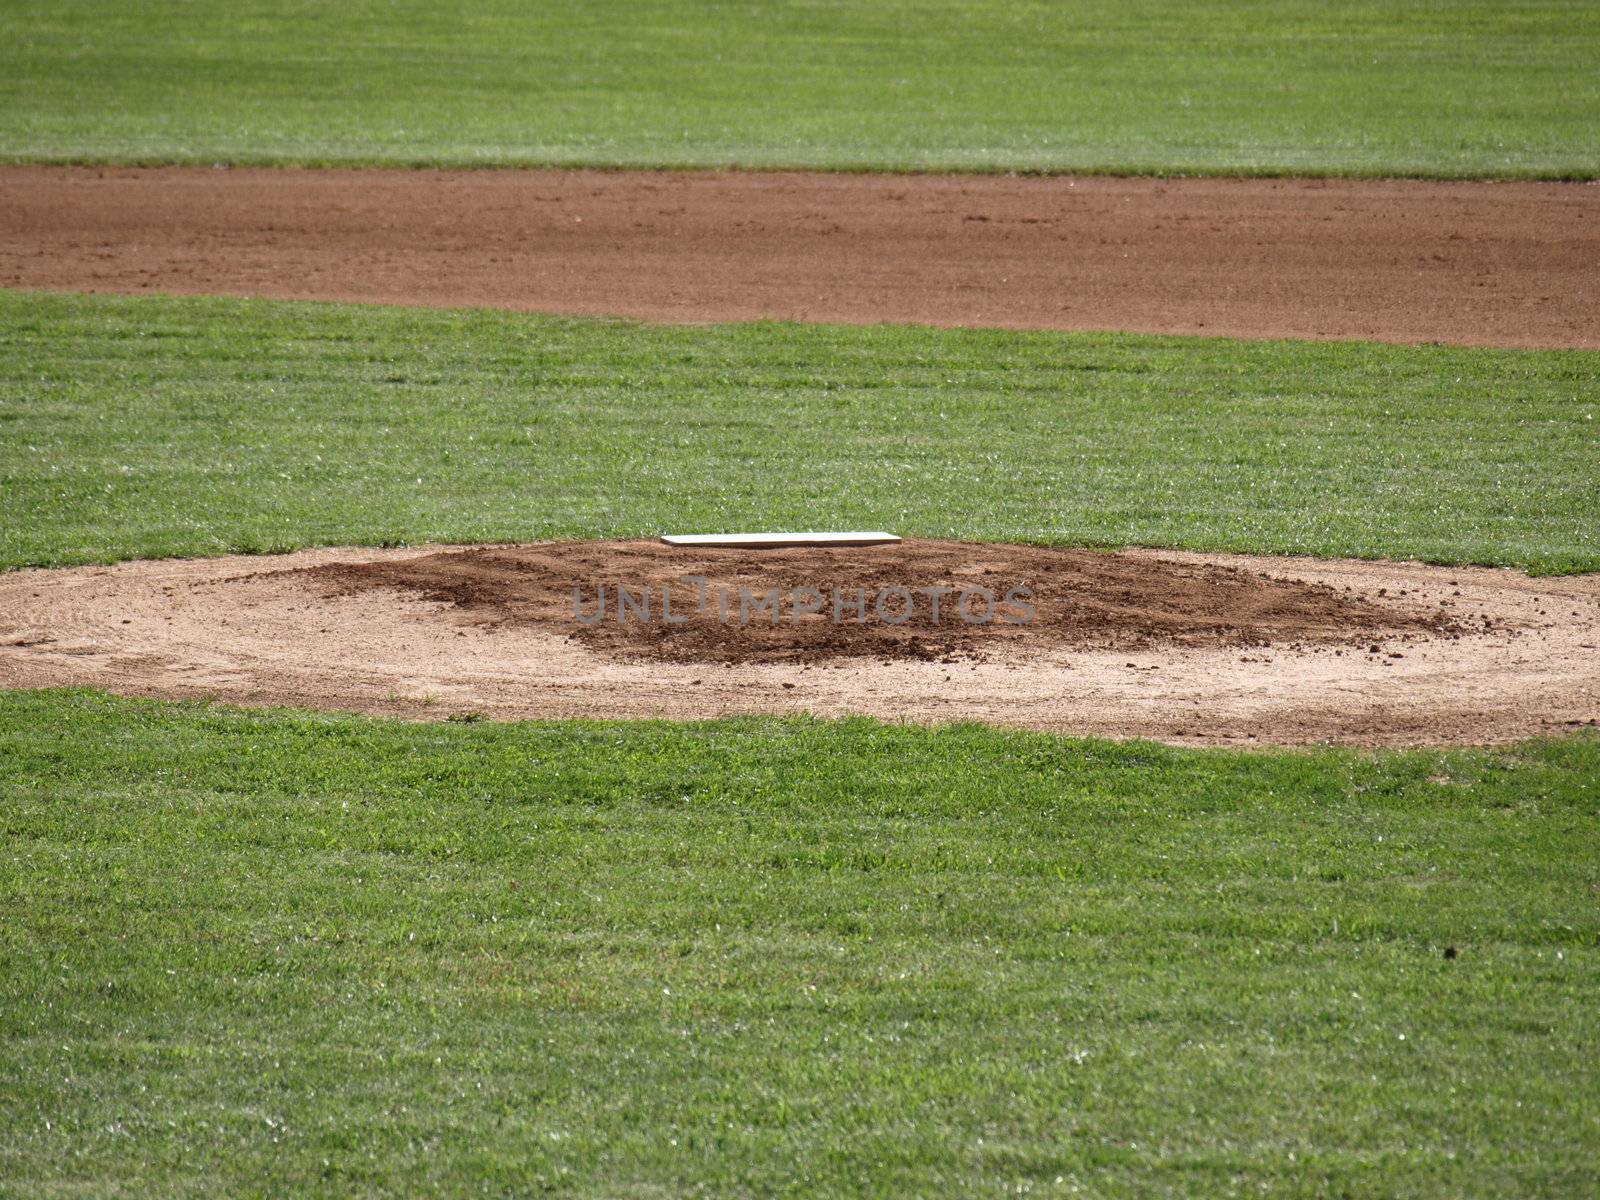 A closeup view of the pitcher's mound